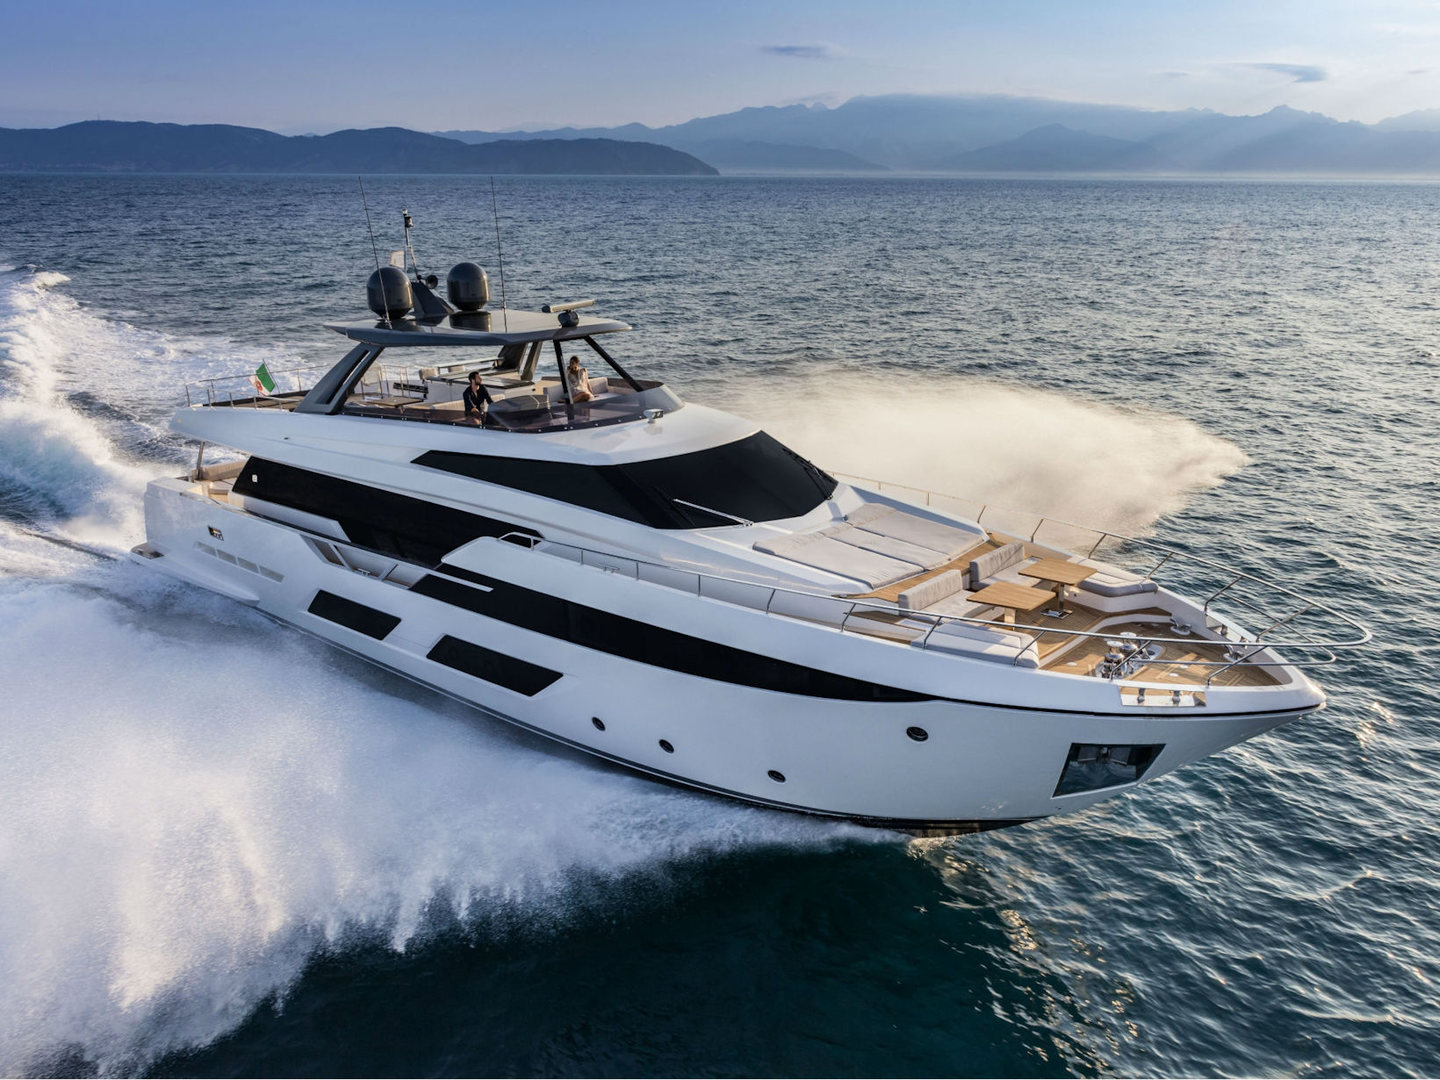 360 VR Virtual Tours of the Ferretti Yachts 920